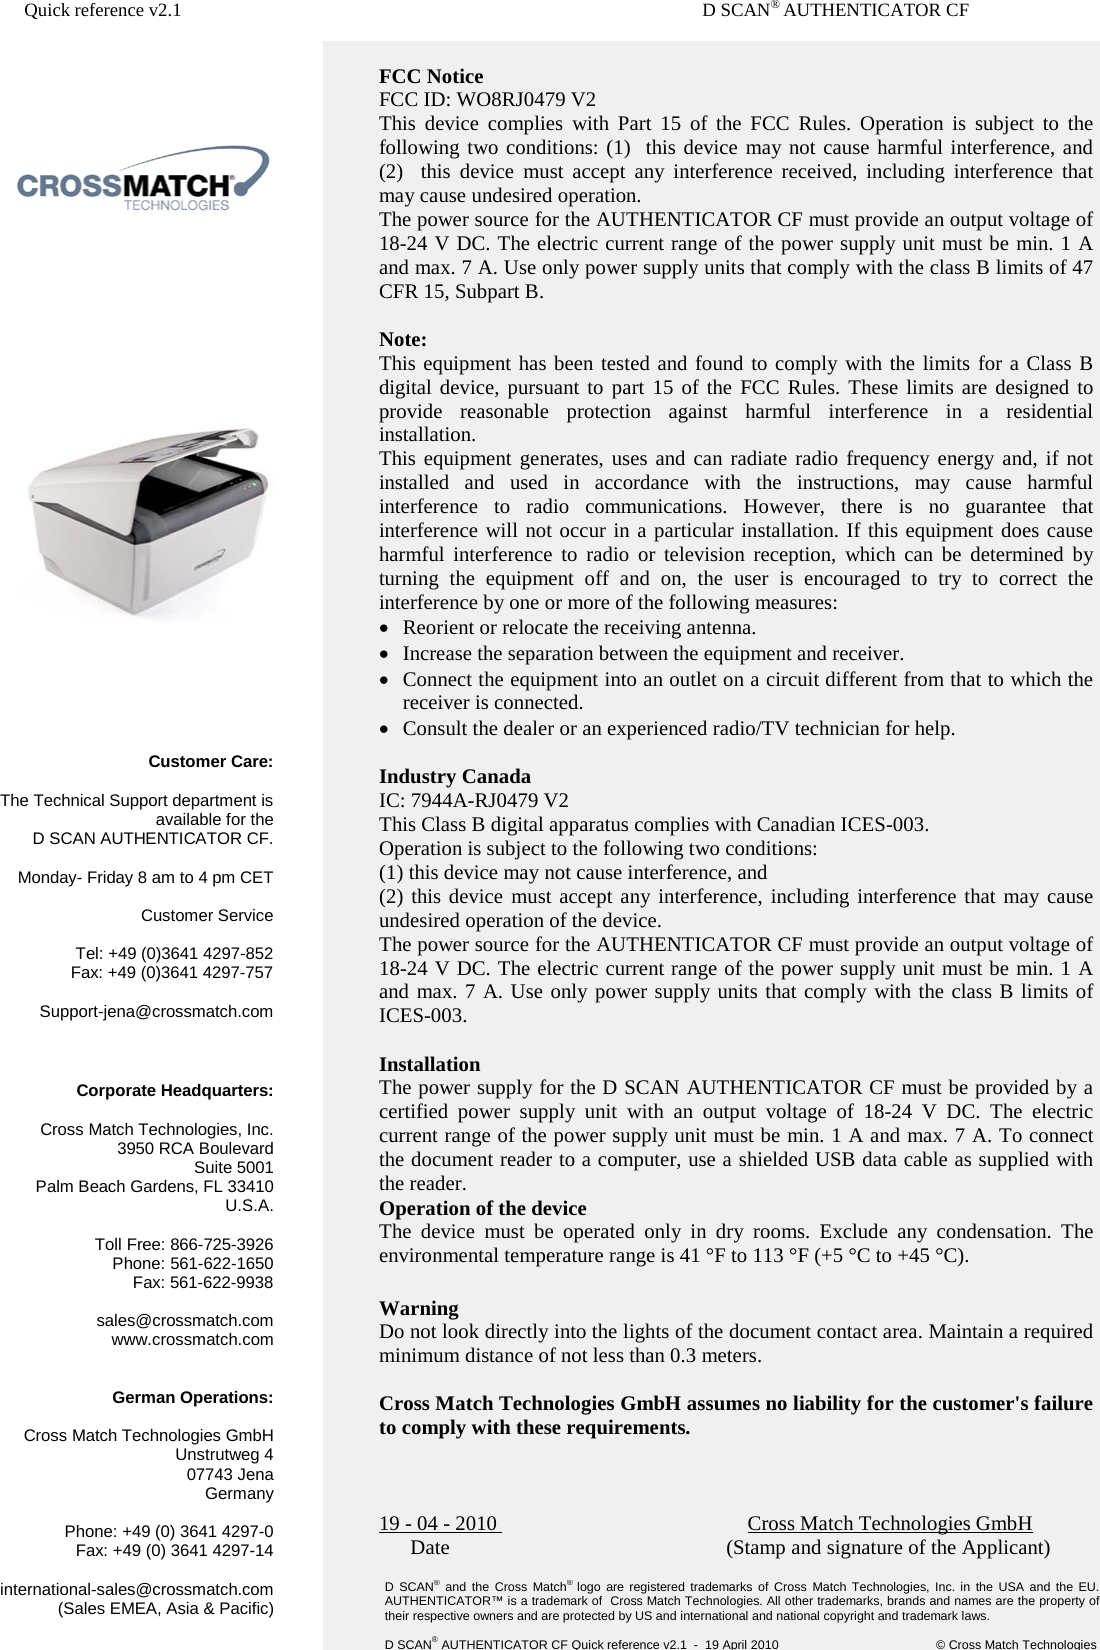 Quick reference v2.1       D SCAN® AUTHENTICATOR CF       FCC Notice FCC ID: WO8RJ0479 V2 This device complies with Part 15 of the FCC Rules. Operation is subject to the following two conditions: (1)  this device may not cause harmful interference, and (2)  this device must accept any interference received, including interference that may cause undesired operation. The power source for the AUTHENTICATOR CF must provide an output voltage of 18-24 V DC. The electric current range of the power supply unit must be min. 1 A and max. 7 A. Use only power supply units that comply with the class B limits of 47 CFR 15, Subpart B.  Note:  This equipment has been tested and found to comply with the limits for a Class B digital device, pursuant to part 15 of the FCC Rules. These limits are designed to provide reasonable protection against harmful interference in a residential installation. This equipment generates, uses and can radiate radio frequency energy and, if not installed and used in accordance with the instructions, may cause harmful interference to radio communications. However, there is no guarantee that interference will not occur in a particular installation. If this equipment does cause harmful interference to radio or television reception, which can be determined by turning the equipment off and on, the user is encouraged to try to correct the interference by one or more of the following measures: • Reorient or relocate the receiving antenna. • Increase the separation between the equipment and receiver. • Connect the equipment into an outlet on a circuit different from that to which the receiver is connected. • Consult the dealer or an experienced radio/TV technician for help.  Industry Canada IC: 7944A-RJ0479 V2 This Class B digital apparatus complies with Canadian ICES-003. Operation is subject to the following two conditions:  (1) this device may not cause interference, and  (2) this device must accept any interference, including interference that may cause undesired operation of the device. The power source for the AUTHENTICATOR CF must provide an output voltage of 18-24 V DC. The electric current range of the power supply unit must be min. 1 A and max. 7 A. Use only power supply units that comply with the class B limits of ICES-003.  Installation The power supply for the D SCAN AUTHENTICATOR CF must be provided by a certified power supply unit with an output voltage of 18-24 V DC. The electric current range of the power supply unit must be min. 1 A and max. 7 A. To connect the document reader to a computer, use a shielded USB data cable as supplied with the reader. Operation of the device The device must be operated only in dry rooms. Exclude any condensation. The environmental temperature range is 41 °F to 113 °F (+5 °C to +45 °C).  Warning Do not look directly into the lights of the document contact area. Maintain a required minimum distance of not less than 0.3 meters.  Cross Match Technologies GmbH assumes no liability for the customer&apos;s failure to comply with these requirements.    19 - 04 - 2010     Cross Match Technologies GmbH       Date                       (Stamp and signature of the Applicant) Customer Care:  The Technical Support department is available for the  D SCAN AUTHENTICATOR CF.   Monday- Friday 8 am to 4 pm CET  Customer Service  Tel: +49 (0)3641 4297-852 Fax: +49 (0)3641 4297-757  Support-jena@crossmatch.com  Corporate Headquarters:  Cross Match Technologies, Inc. 3950 RCA Boulevard Suite 5001 Palm Beach Gardens, FL 33410 U.S.A.  Toll Free: 866-725-3926 Phone: 561-622-1650 Fax: 561-622-9938  sales@crossmatch.com www.crossmatch.com   German Operations:  Cross Match Technologies GmbH Unstrutweg 4 07743 Jena Germany  Phone: +49 (0) 3641 4297-0 Fax: +49 (0) 3641 4297-14  international-sales@crossmatch.com (Sales EMEA, Asia &amp; Pacific) D  SCAN® and the Cross Match® logo  are registered trademarks of Cross Match Technologies, Inc. in the USA and the EU. AUTHENTICATOR™ is a trademark of  Cross Match Technologies. All other trademarks, brands and names are the property of their respective owners and are protected by US and international and national copyright and trademark laws.  D SCAN® AUTHENTICATOR CF Quick reference v2.1  -  19 April 2010                  © Cross Match Technologies 